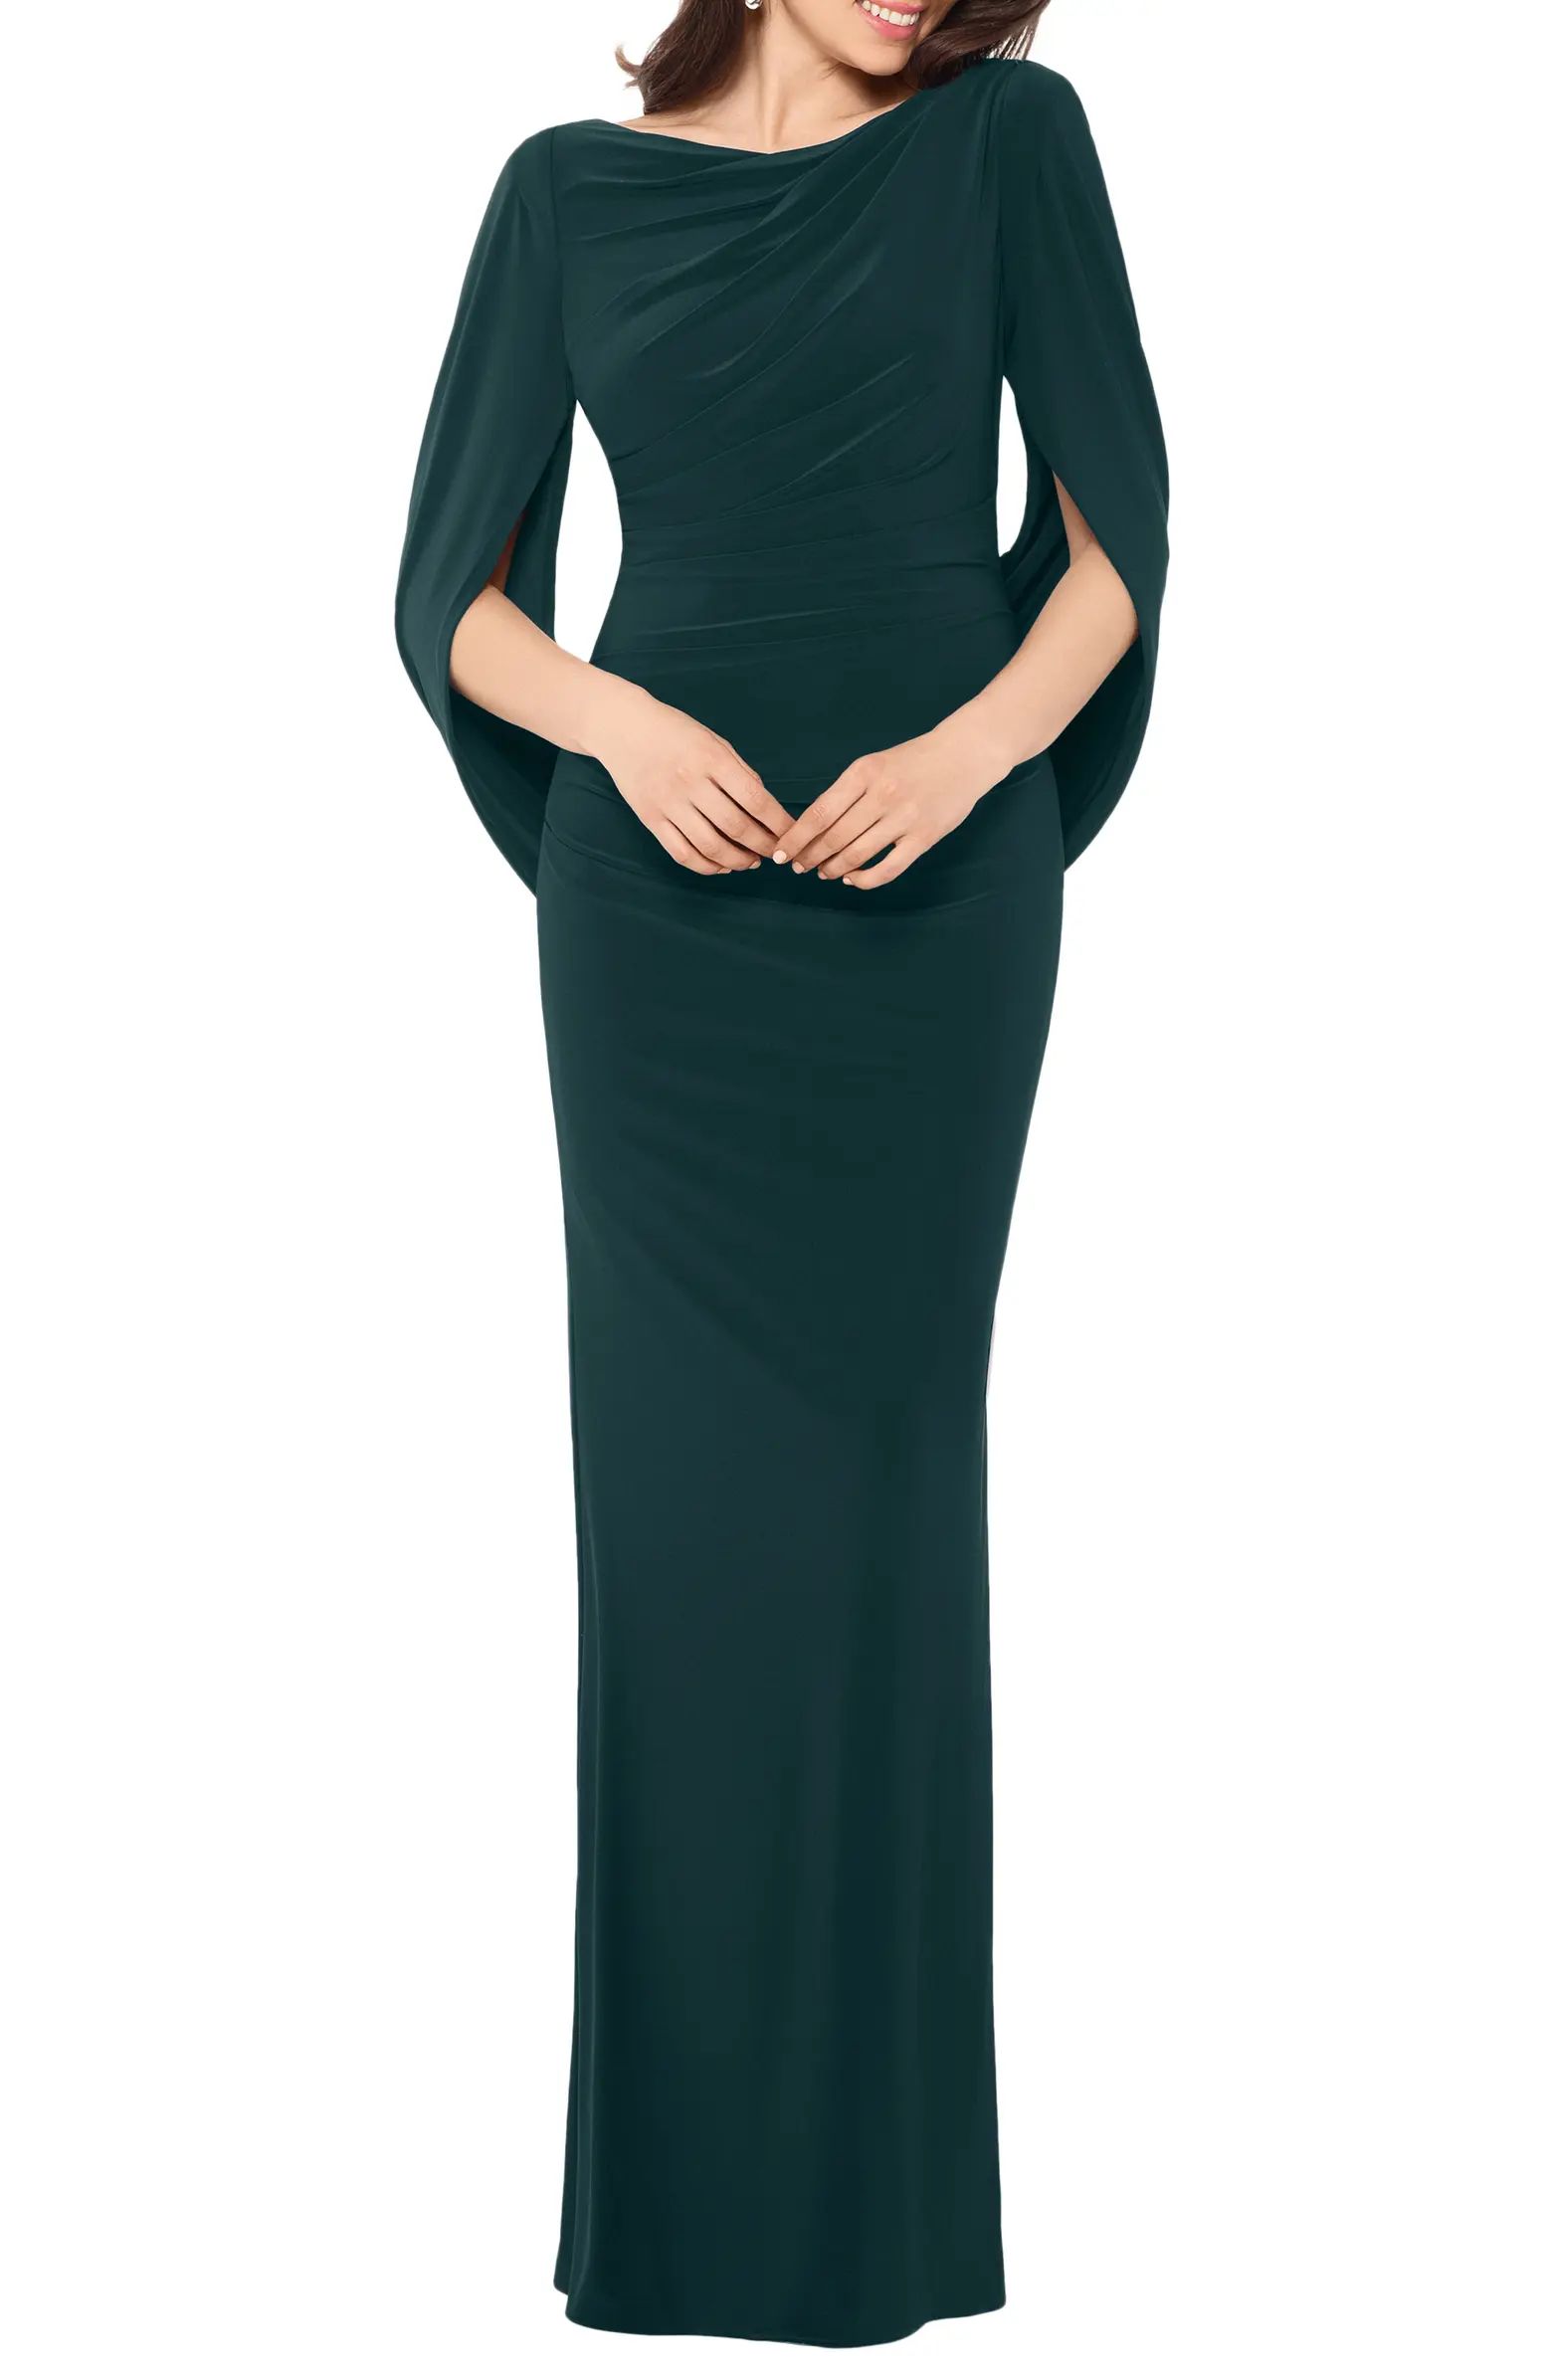 Drape Sleeves Trumpet Evening Gown | Nordstrom